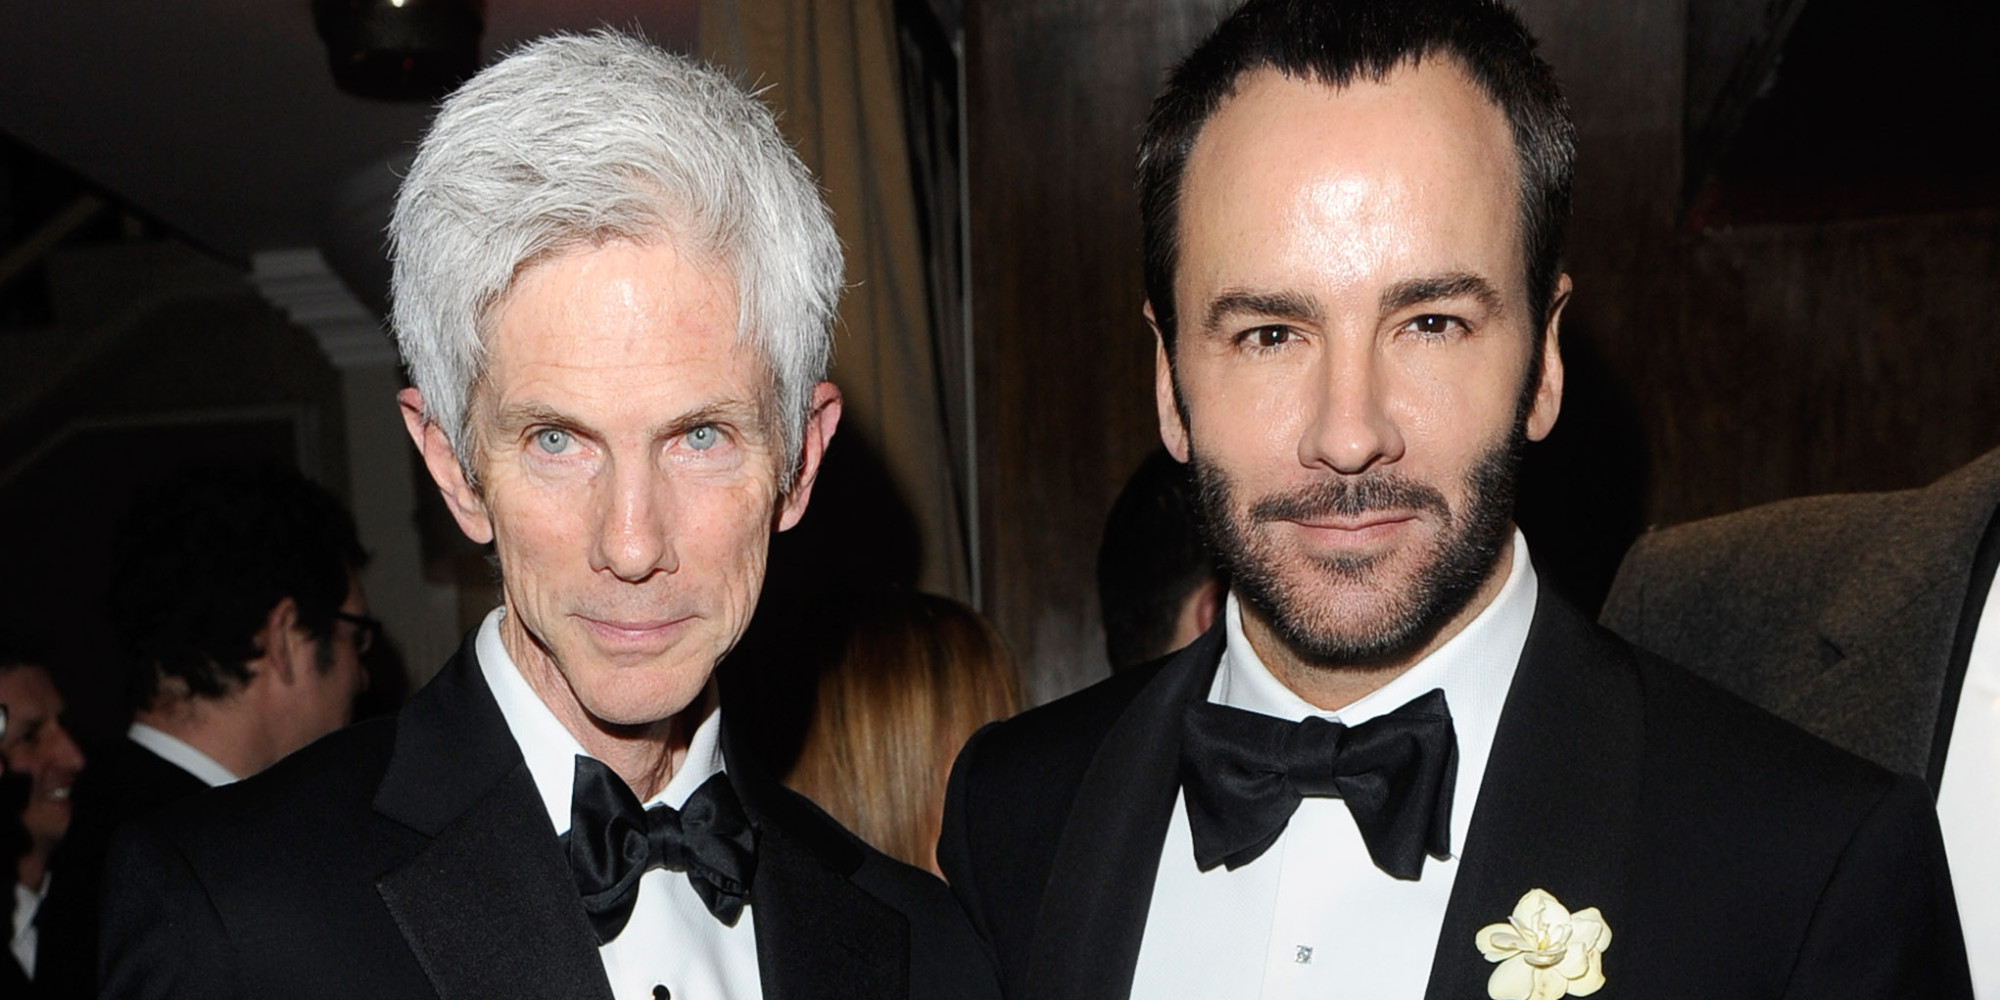 Tom ford and his partner richard buckley #3